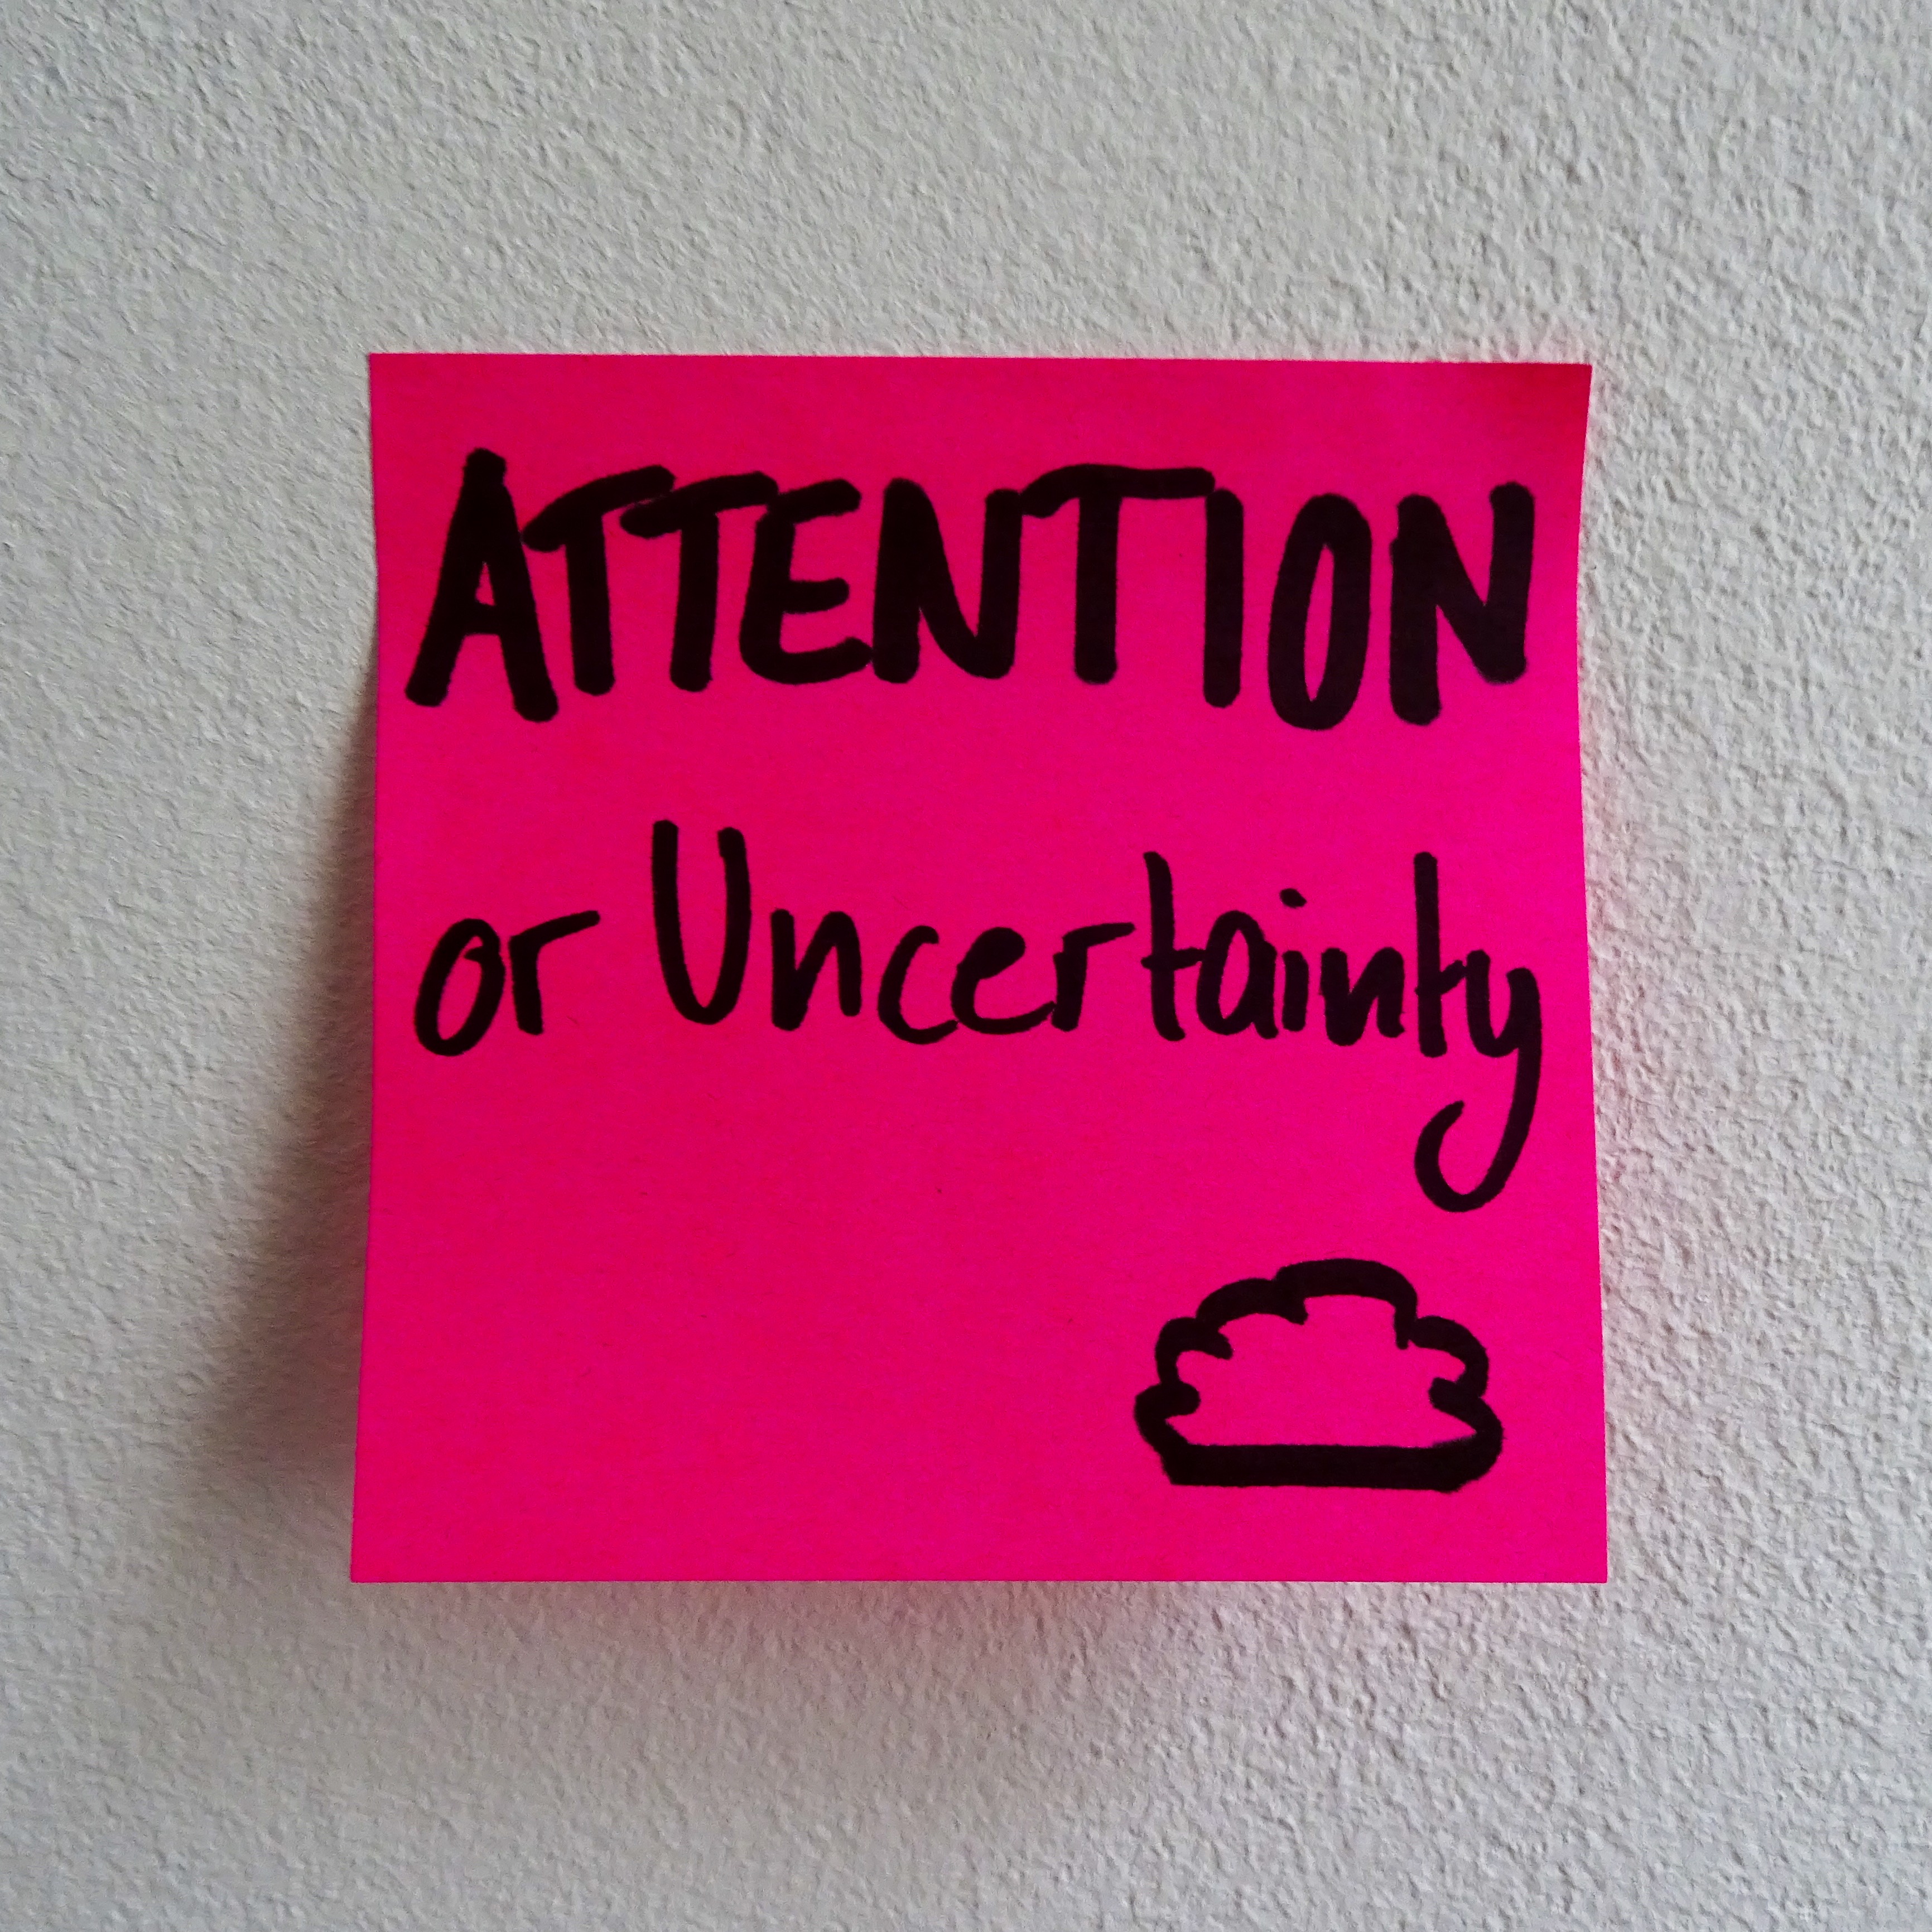 Attention (or Uncertainty)